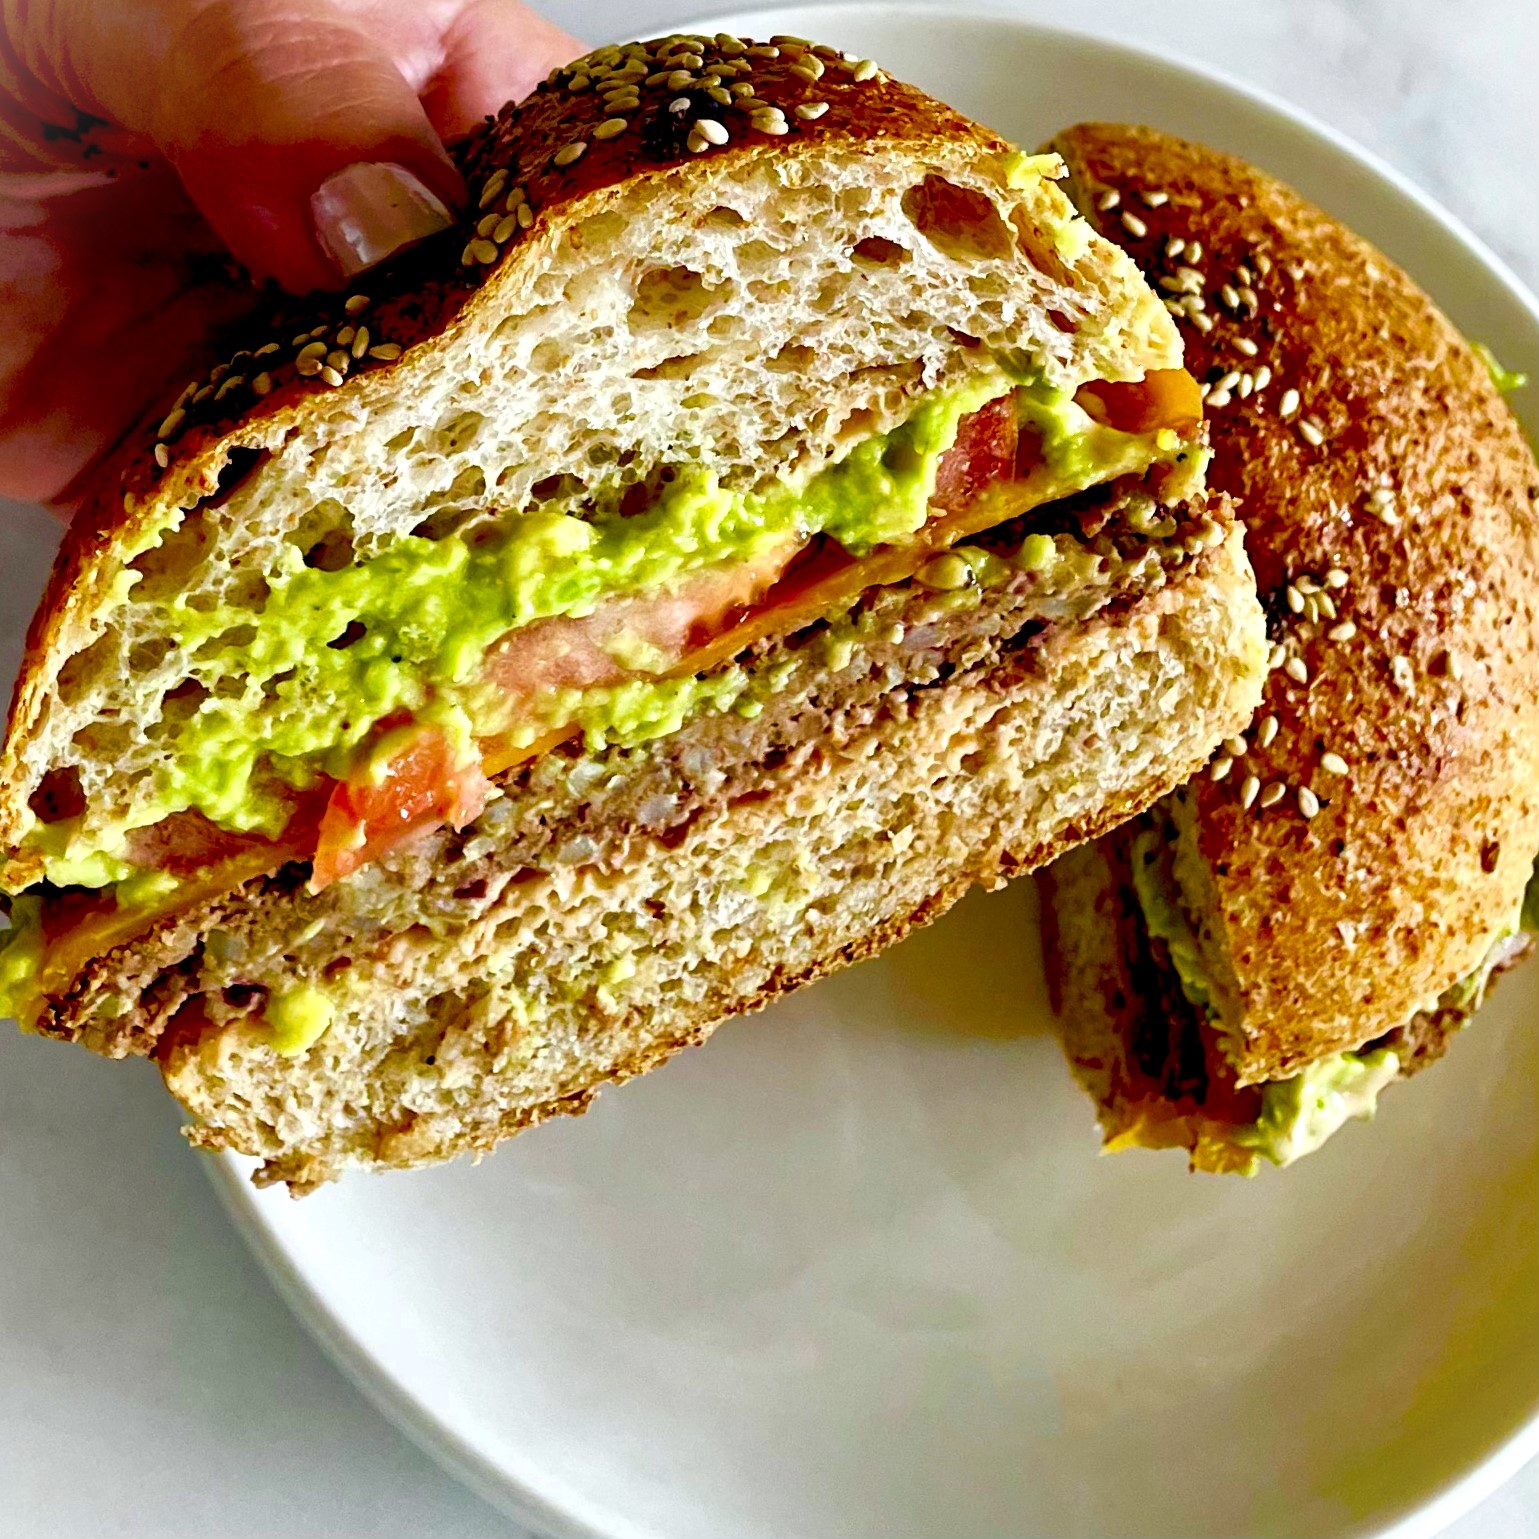 half of a red beans & rice plant-based burger with guacamole